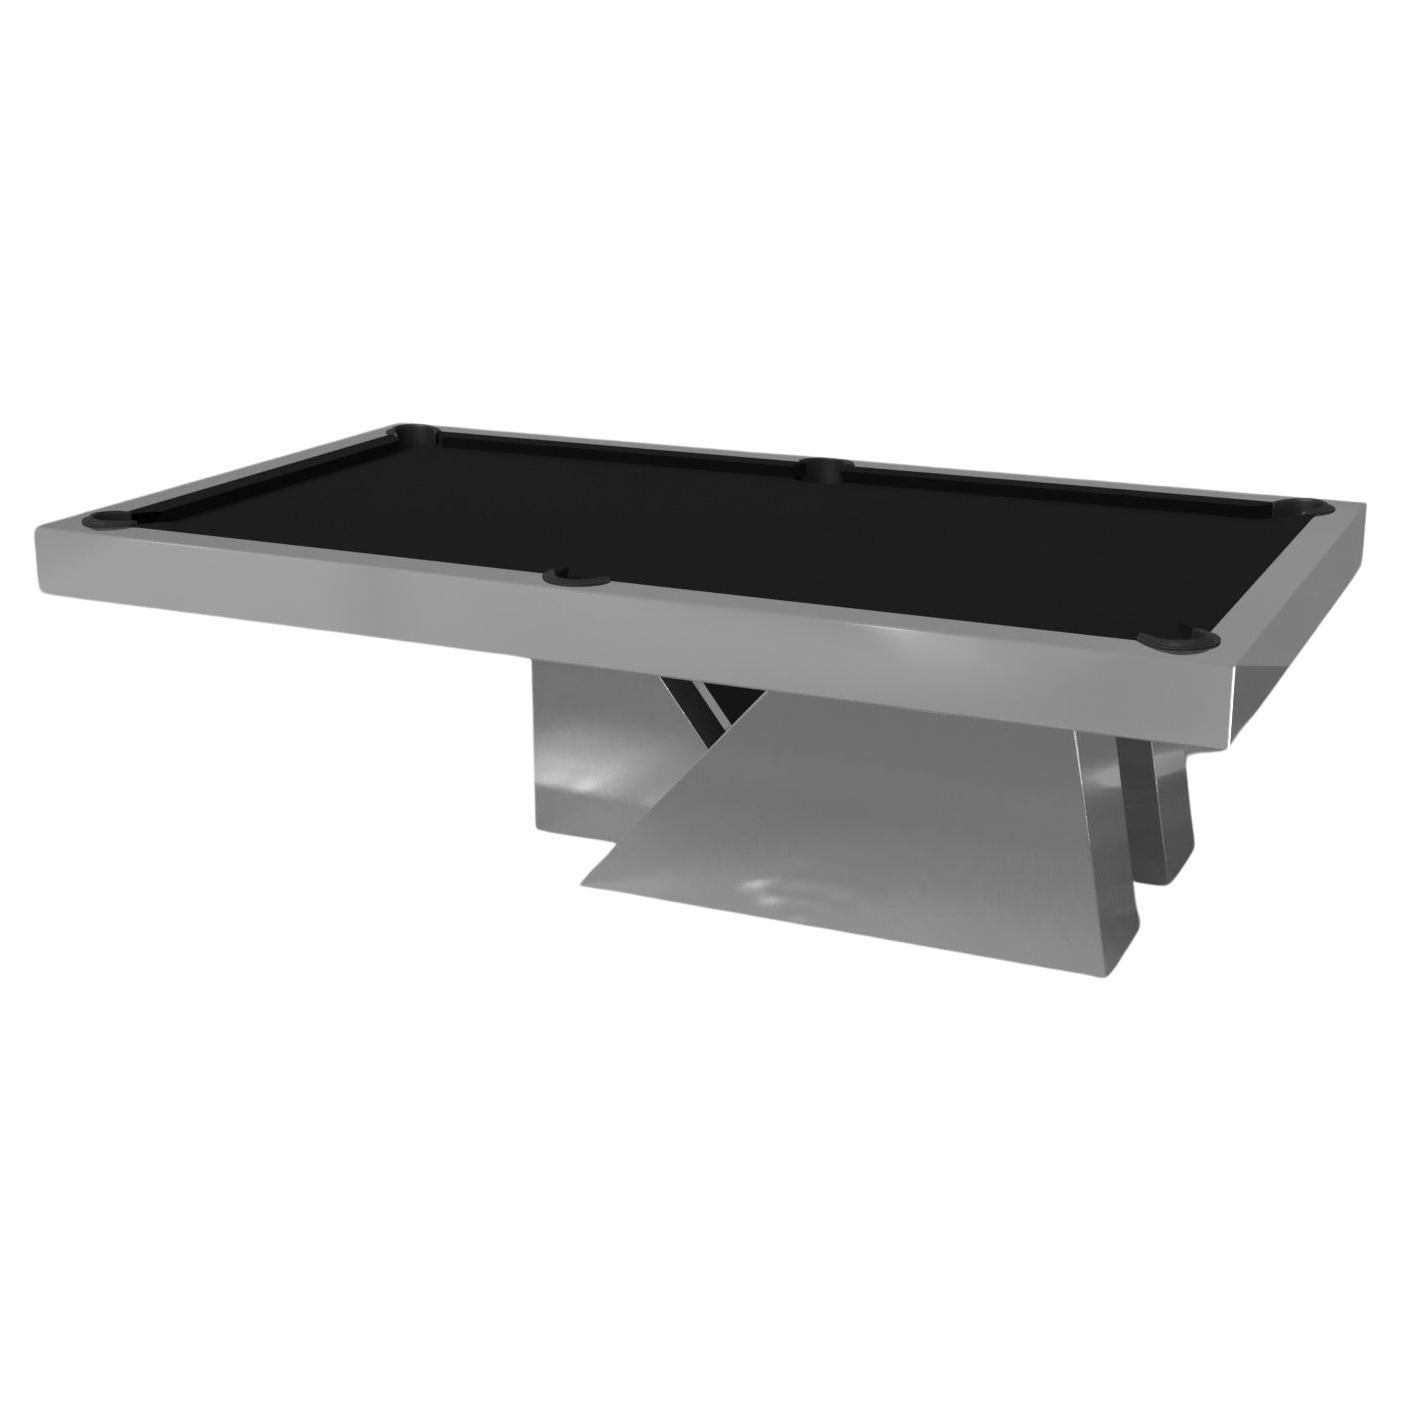 Elevate Customs Stilt Pool Table / Stainless Steel Metal in 8.5' - Made in USA For Sale